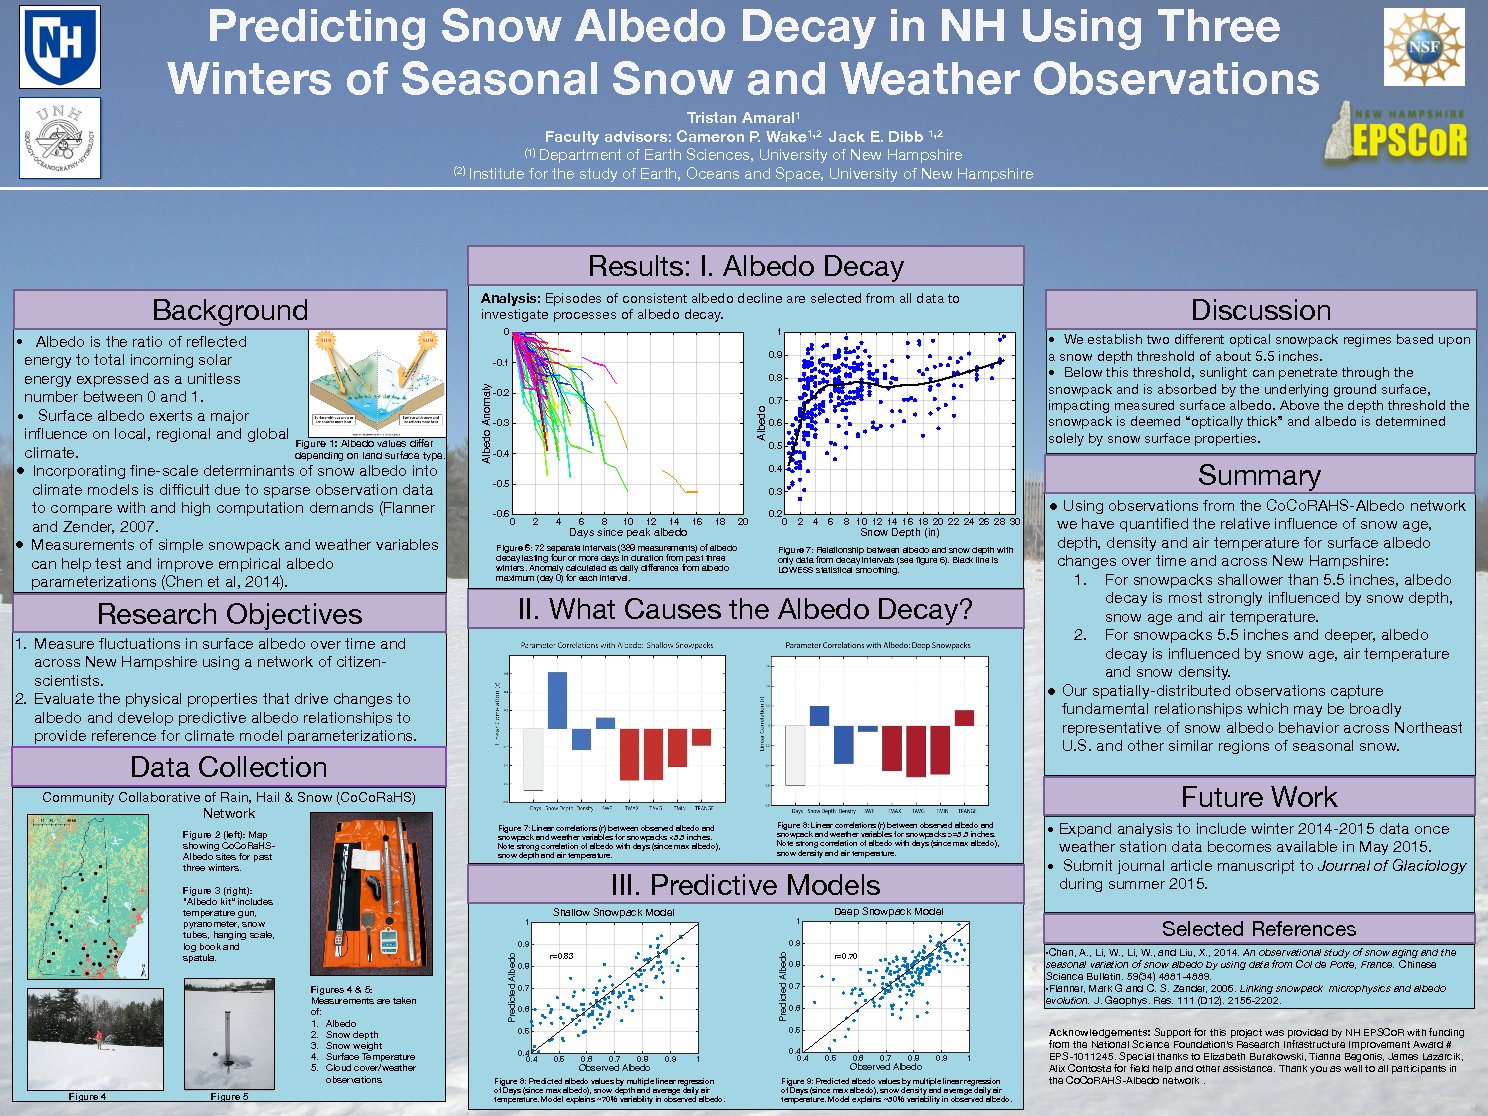 Predicting Snow Albedo Decay In New Hampshire Using Three Winters Seasonal Snow And Weather Observations by tov4